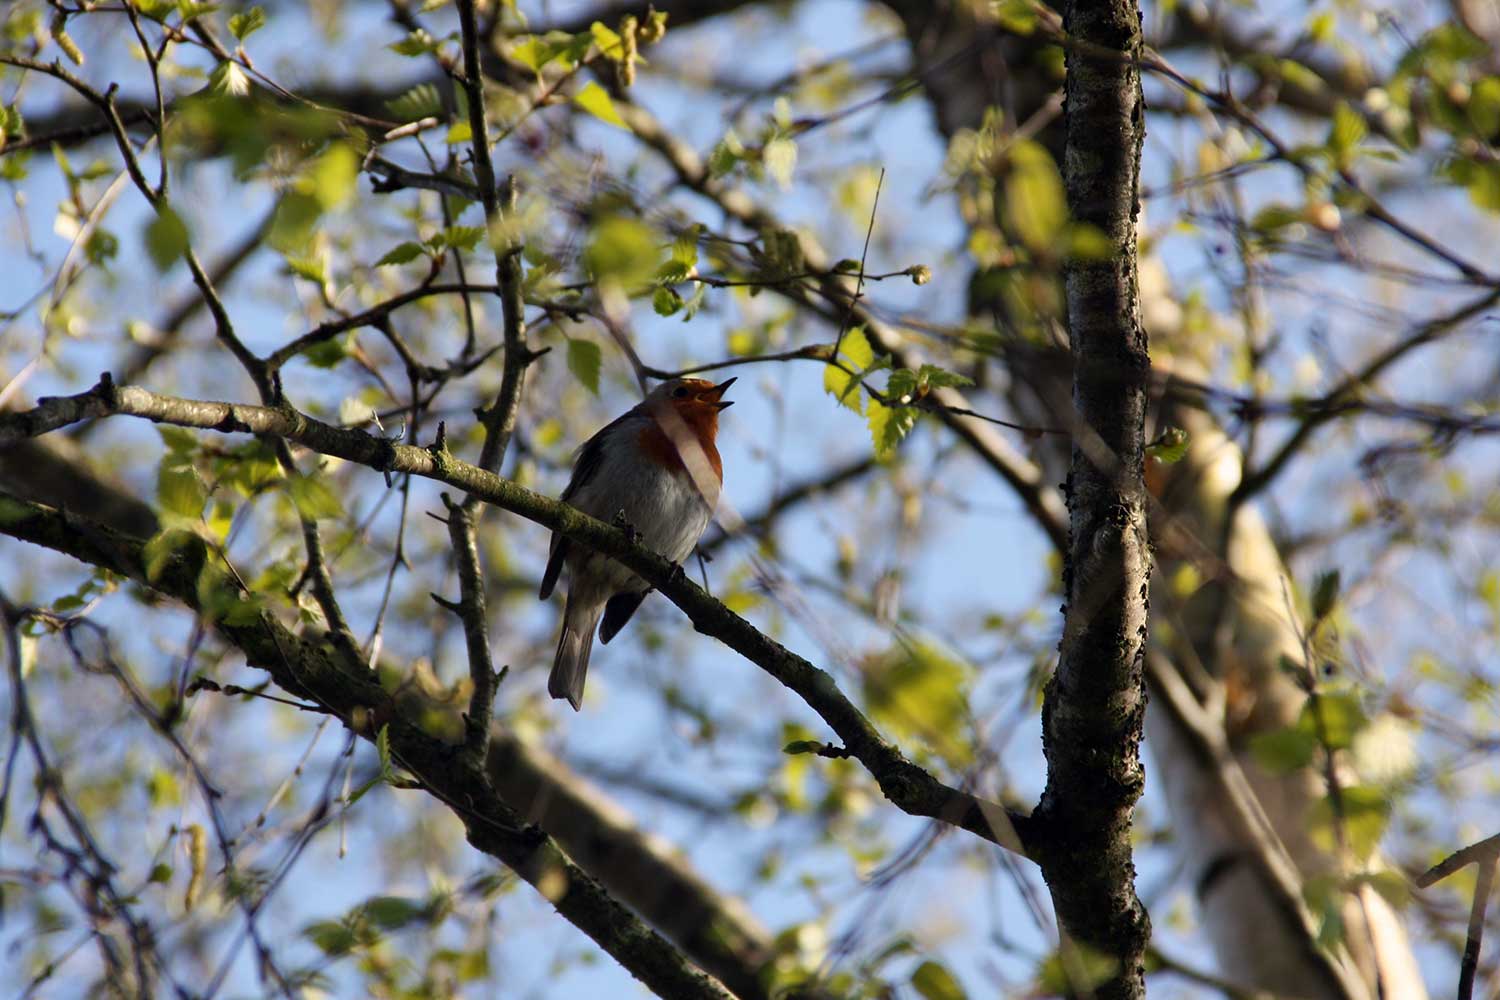 A small brown and gray bird sings in the branches of a tree that is beginning to leaf out in spring